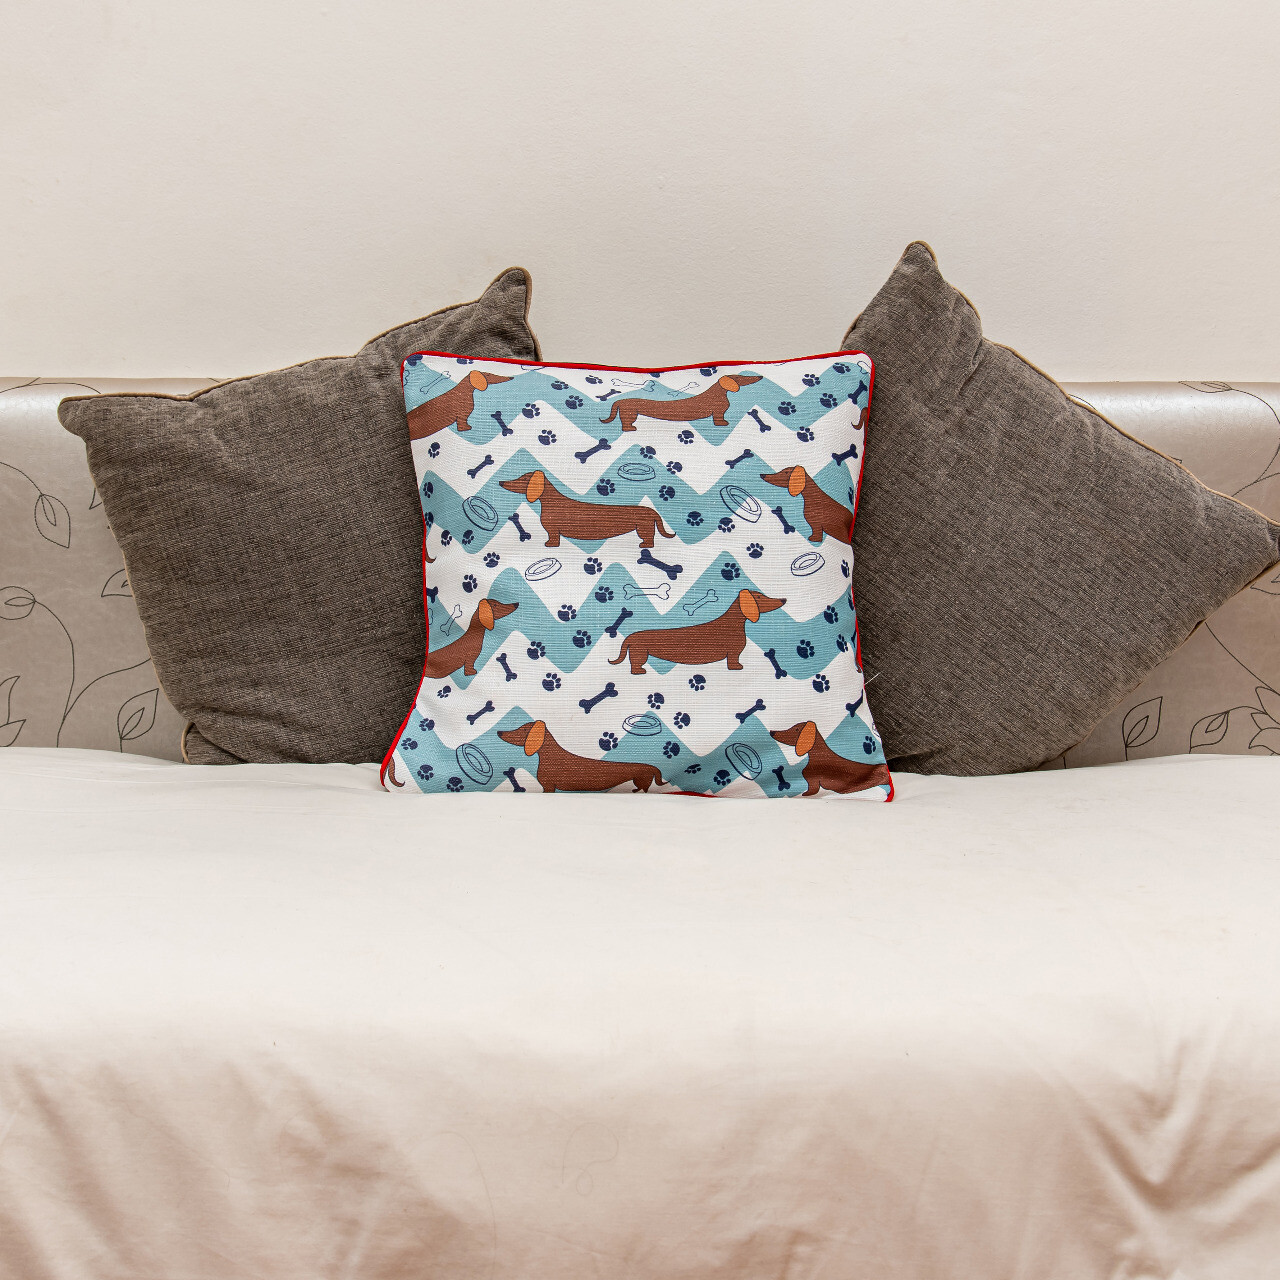 Large Scatter Cushion Slip - Patterned background with brown Dachshunds